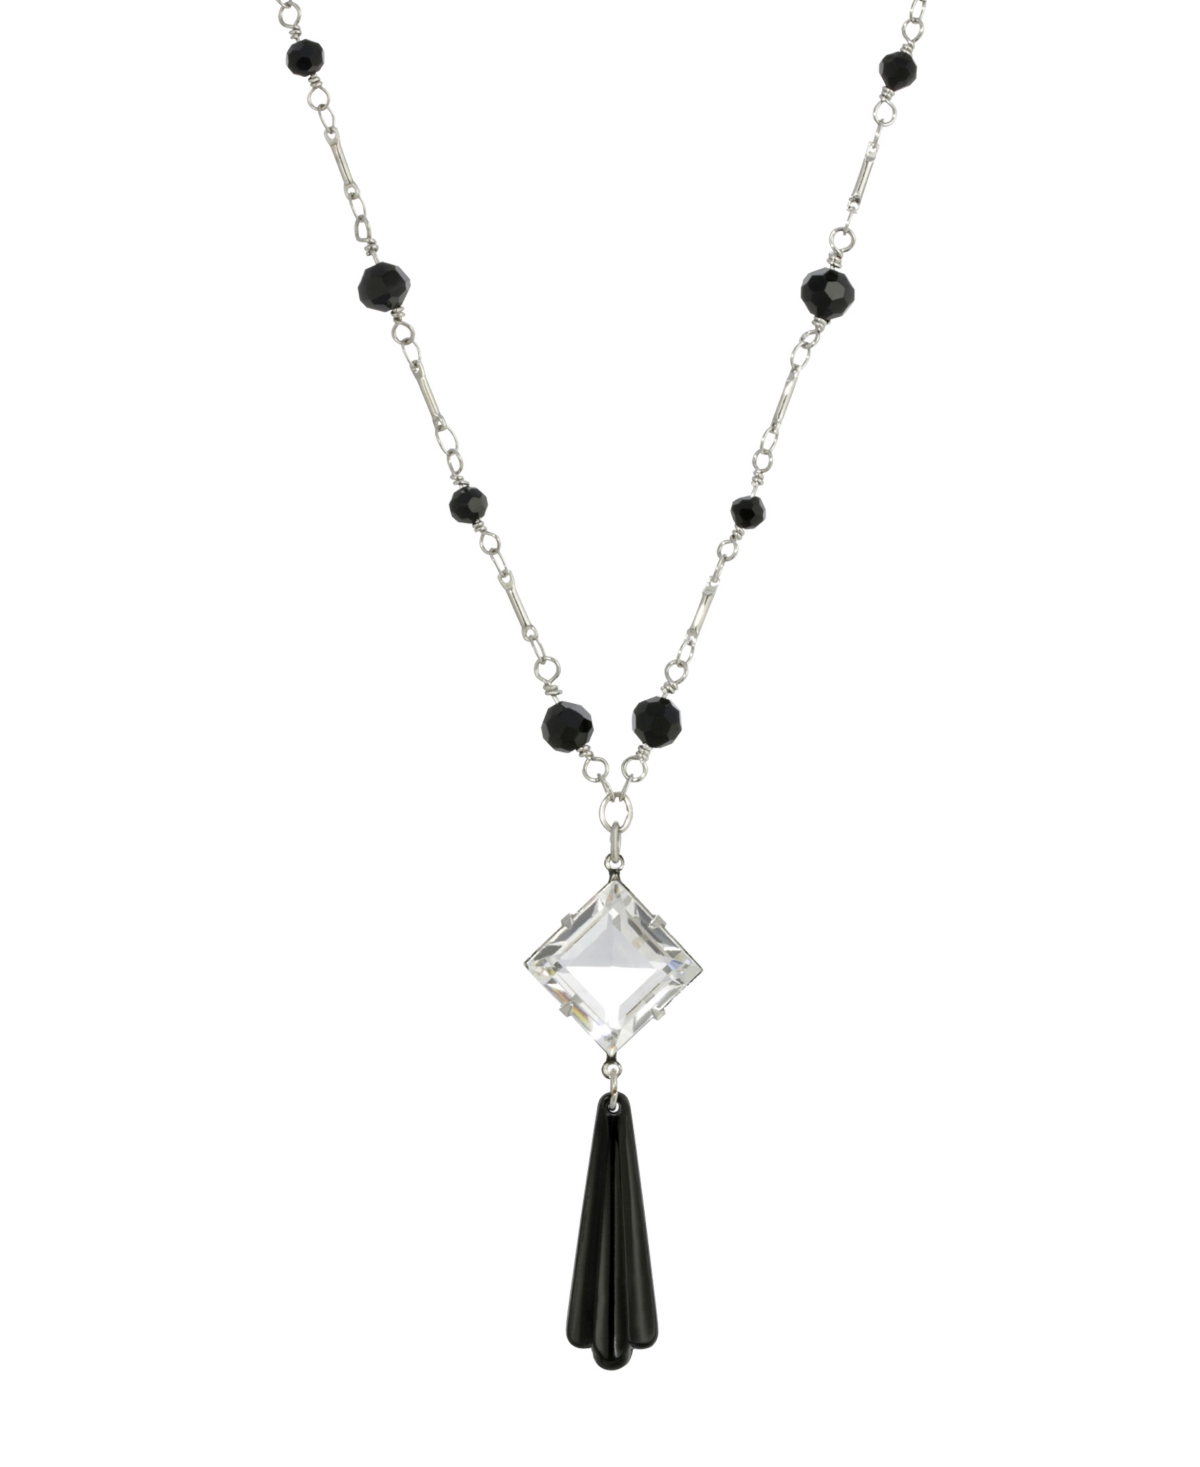 2028 Women's Silver Tone Black Bead Crystal Stone Necklace